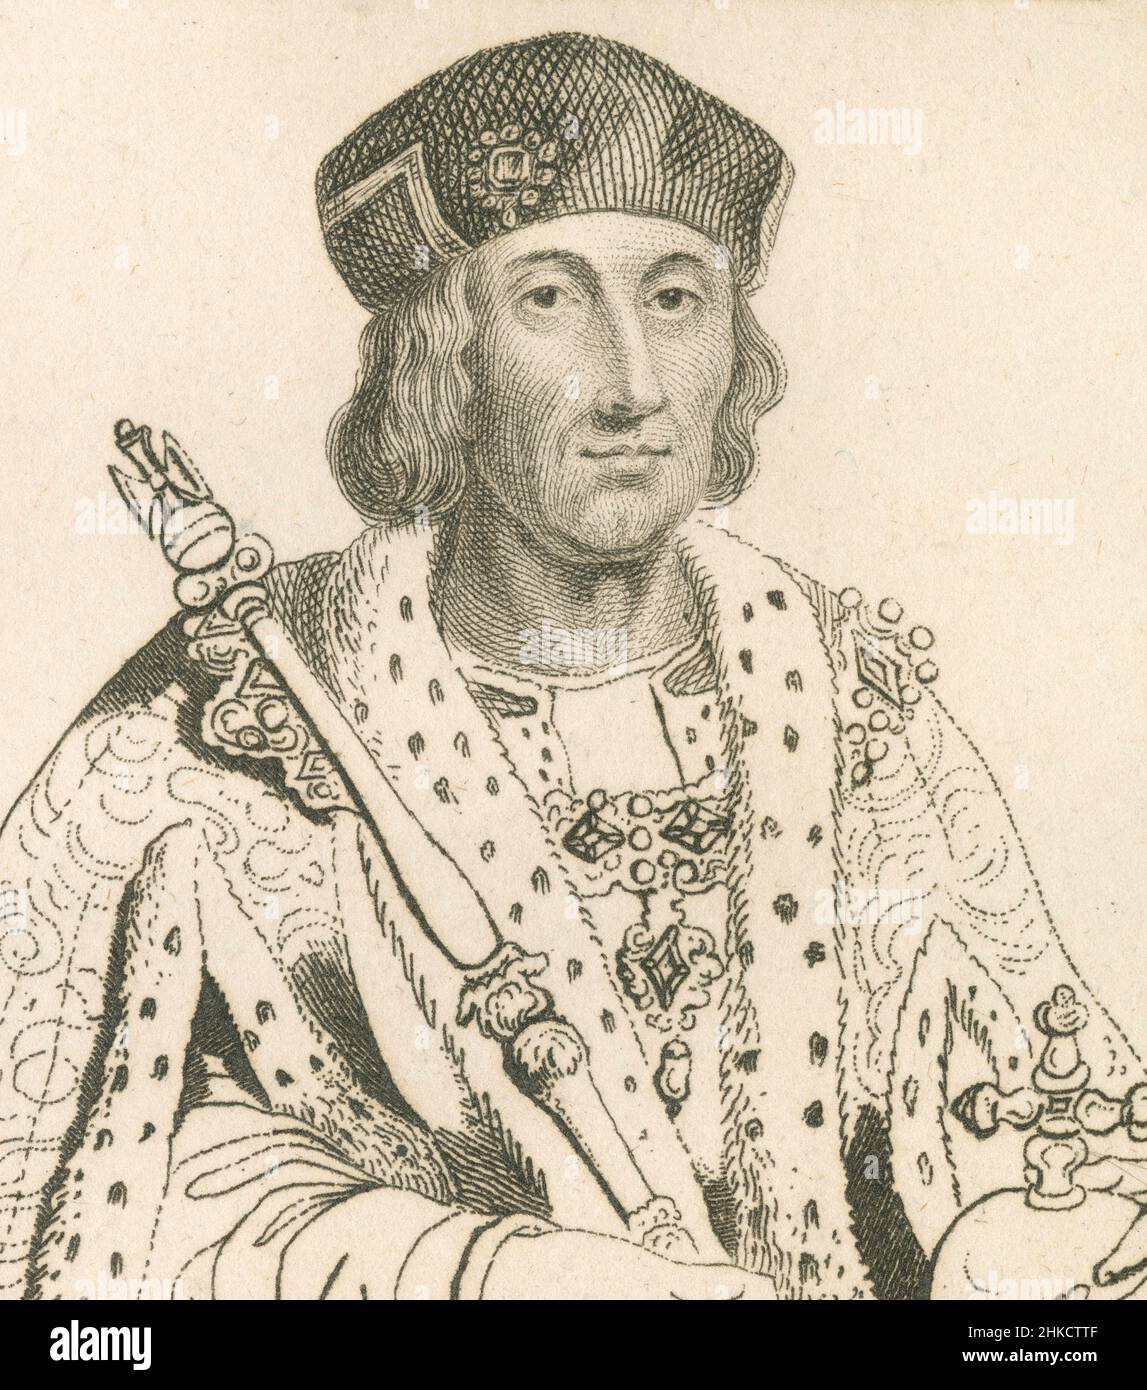 Antique circa 1812 etching of Henry VII of England. Henry VII (1457-1509) was King of England and Lord of Ireland from his seizure of the crown on 22 August 1485 until his death in 1509.  SOURCE: ORIGINAL ETCHING Stock Photo